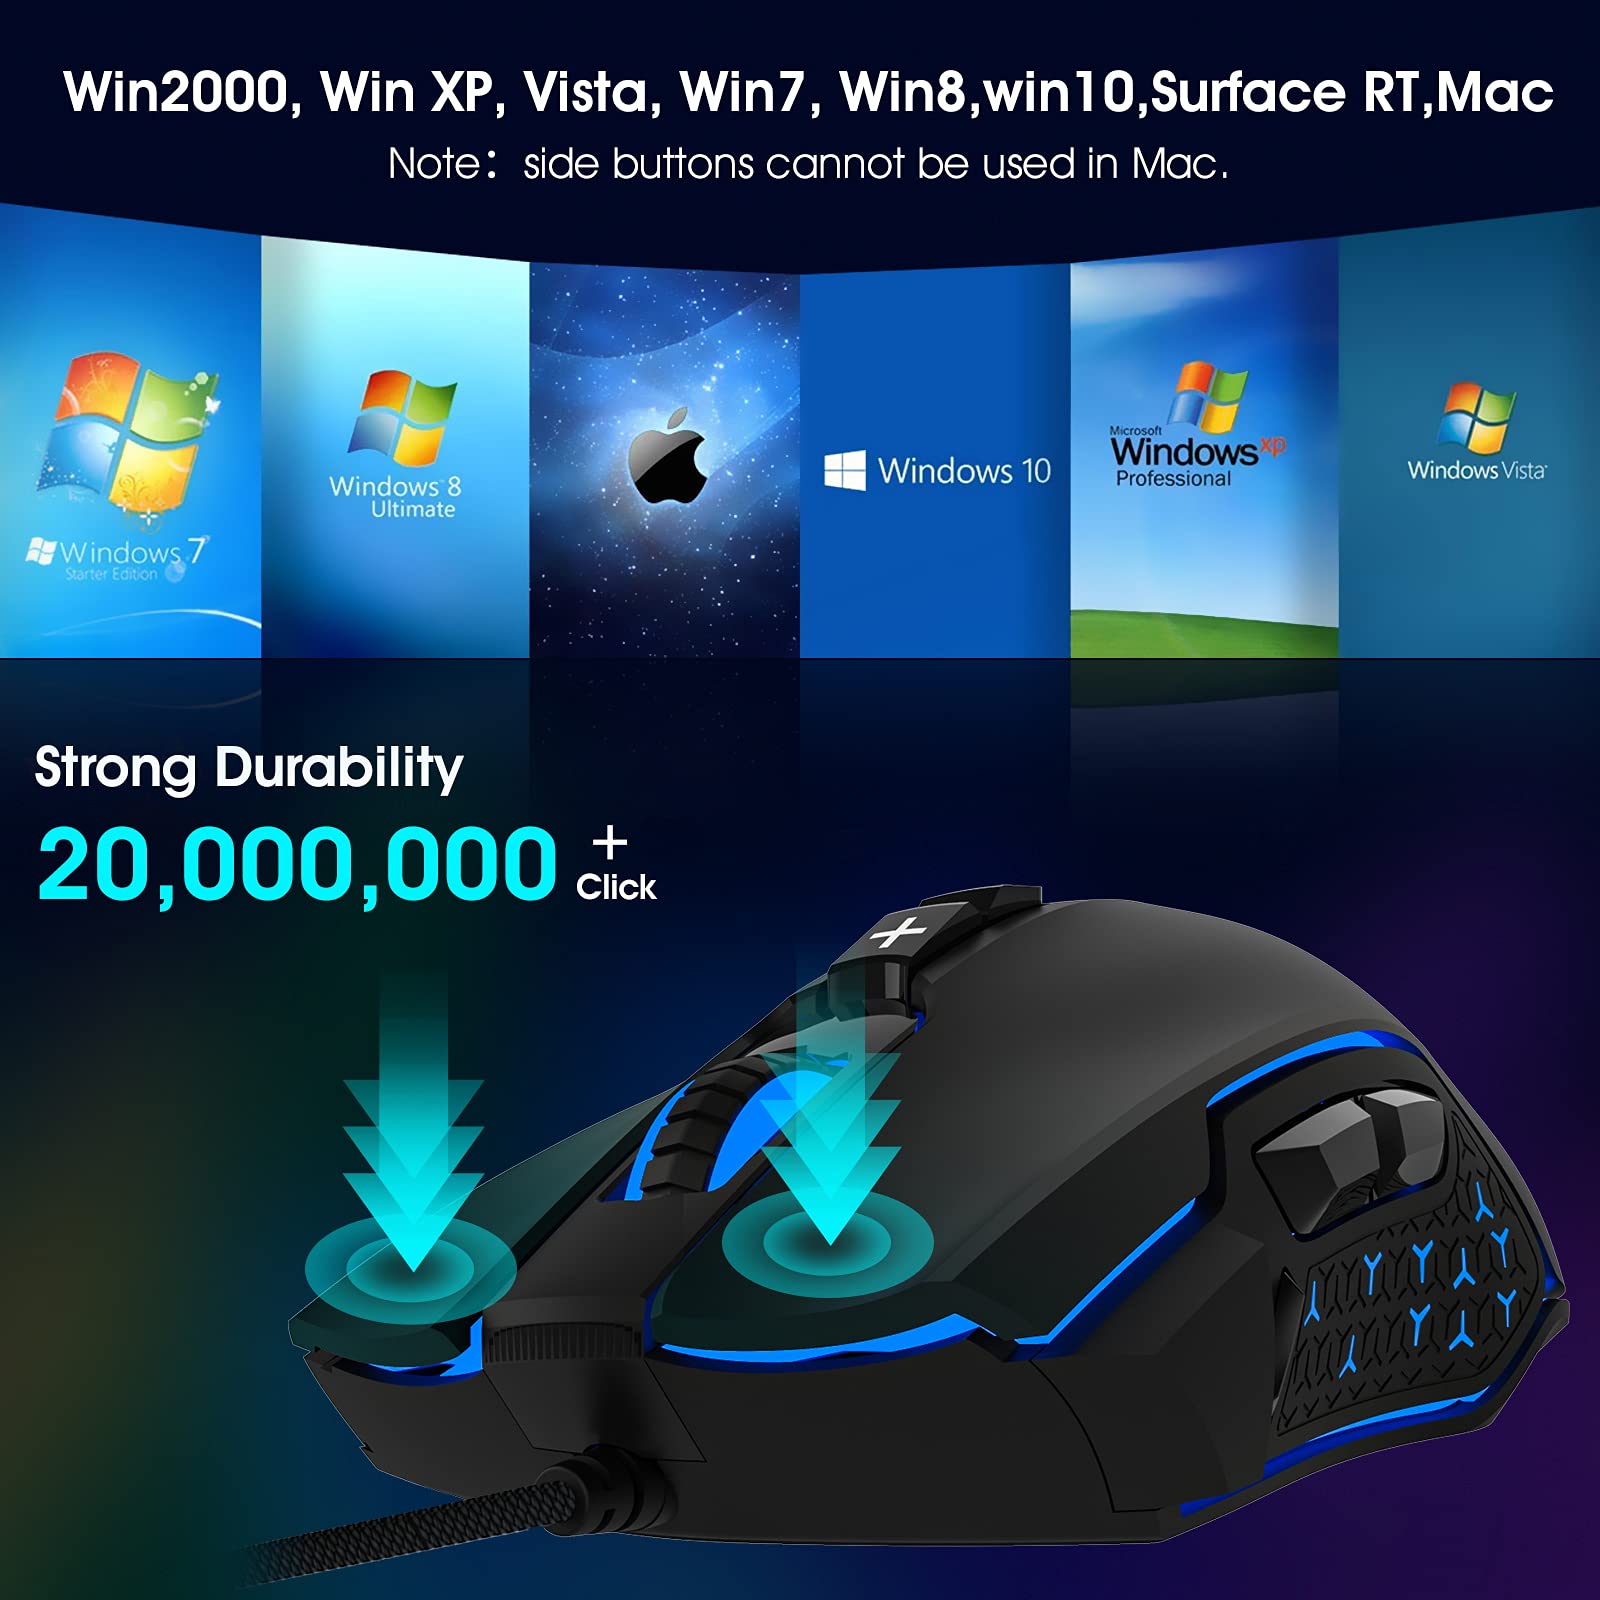 LeadsaiL Gaming Mouse Wired RGB PC Gaming Mice,Up to 7200 DPI, 8 Programmable Buttons,6 Color Backlight, Ergonomic Optical Computer Wired Mouse with Fire Button for Desktop PC Laptop Gamer & Work